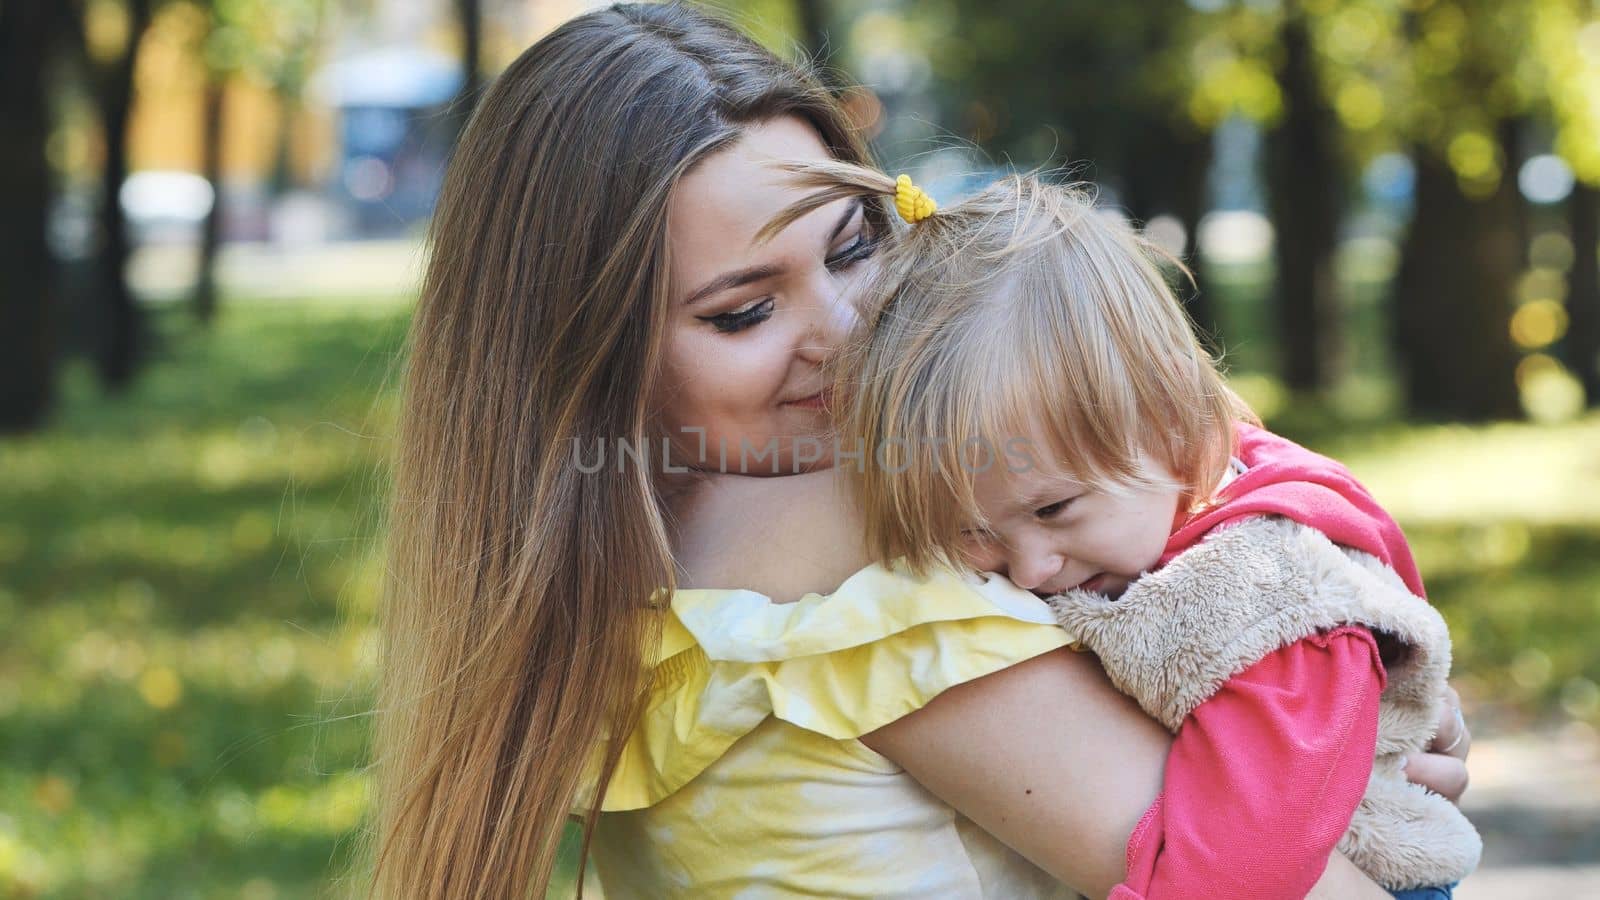 A mother hugs her young daughter in the park in the summer